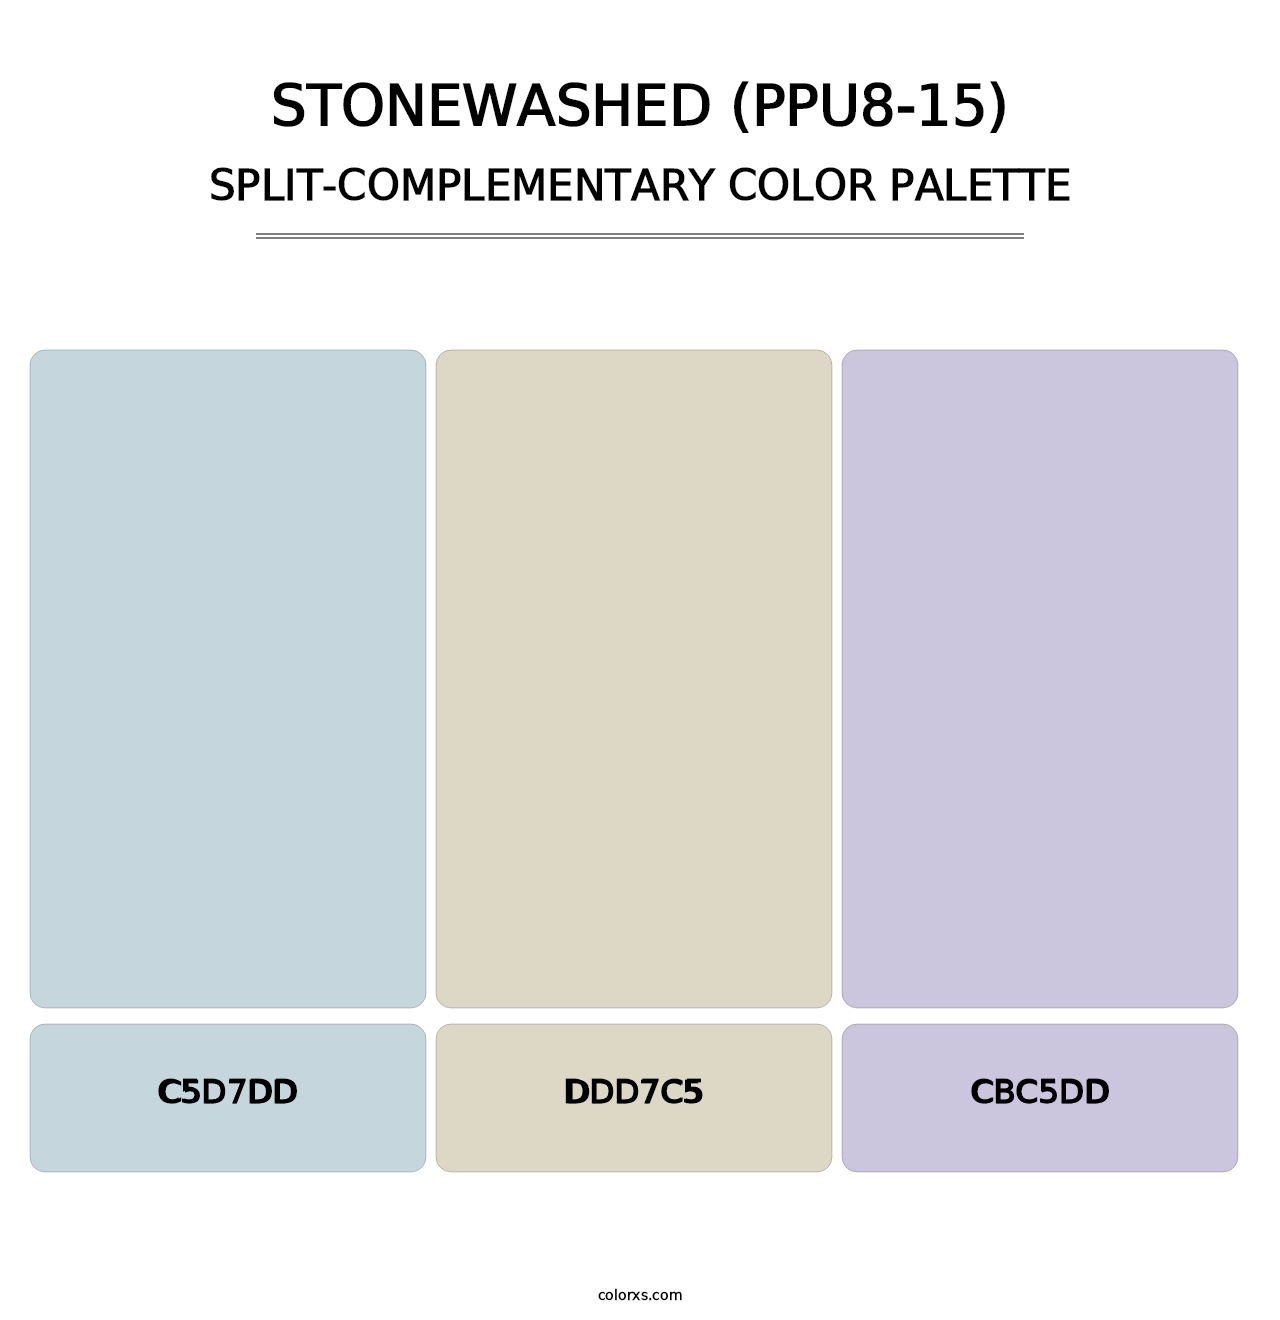 Stonewashed (PPU8-15) - Split-Complementary Color Palette